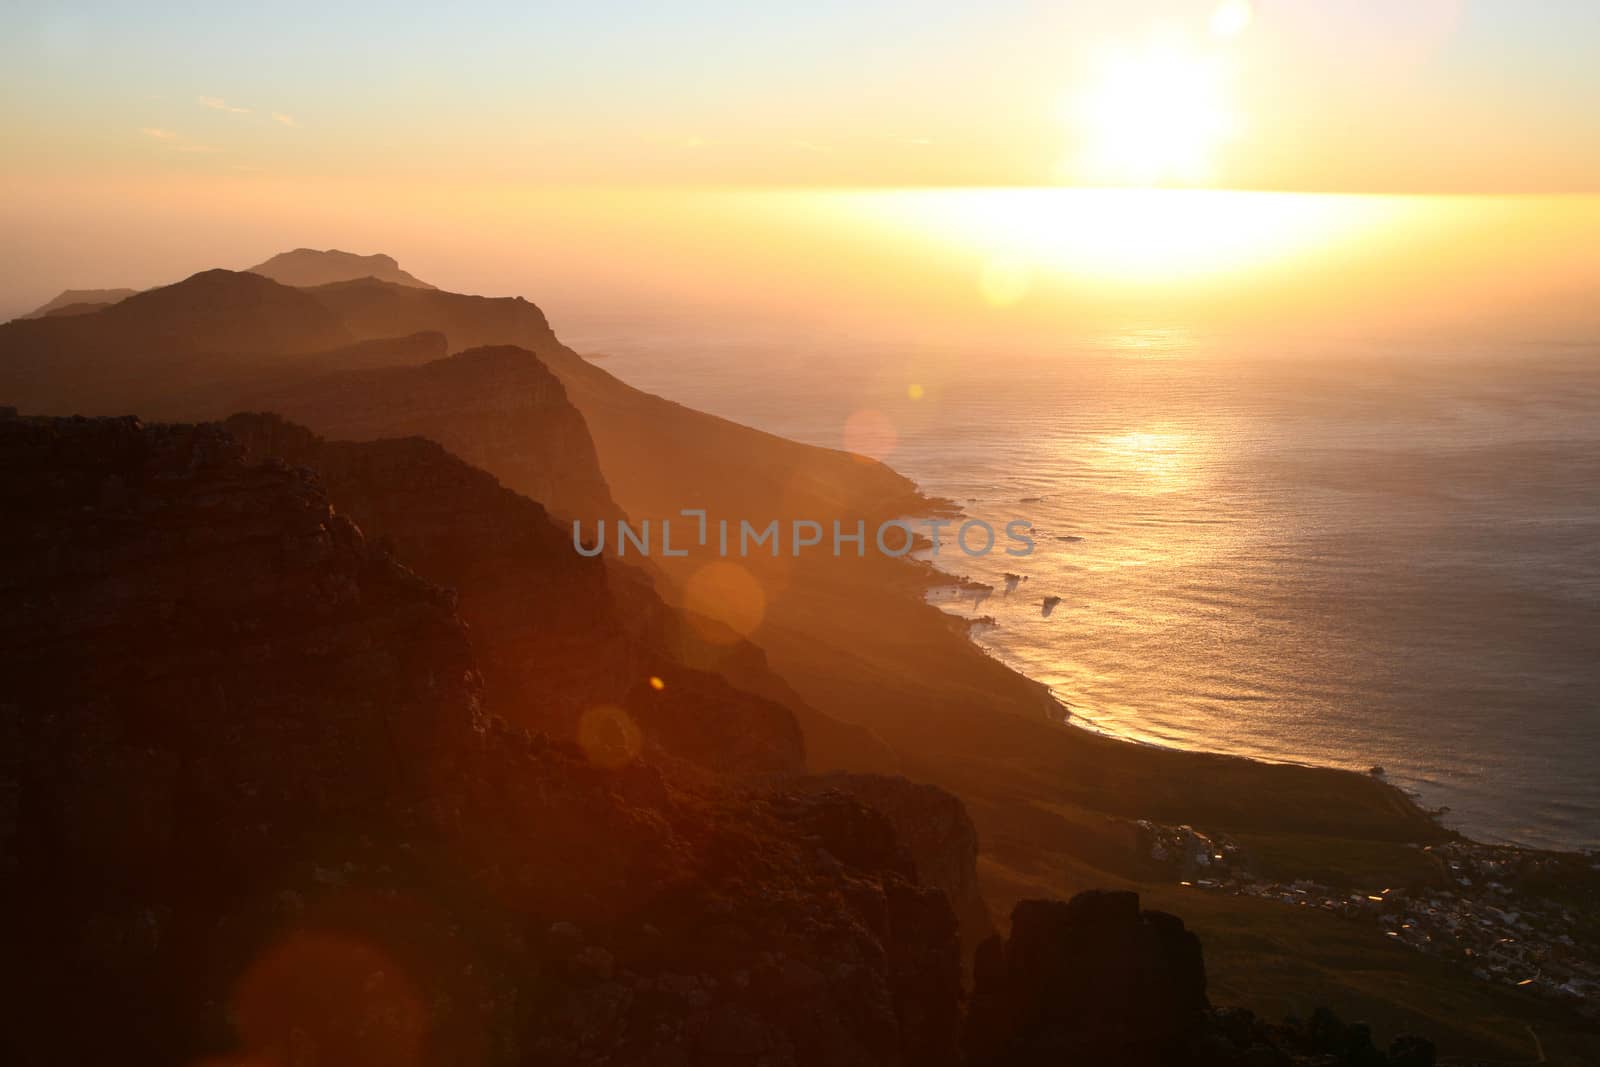 Sunset on the Table mountain in Cape Point.